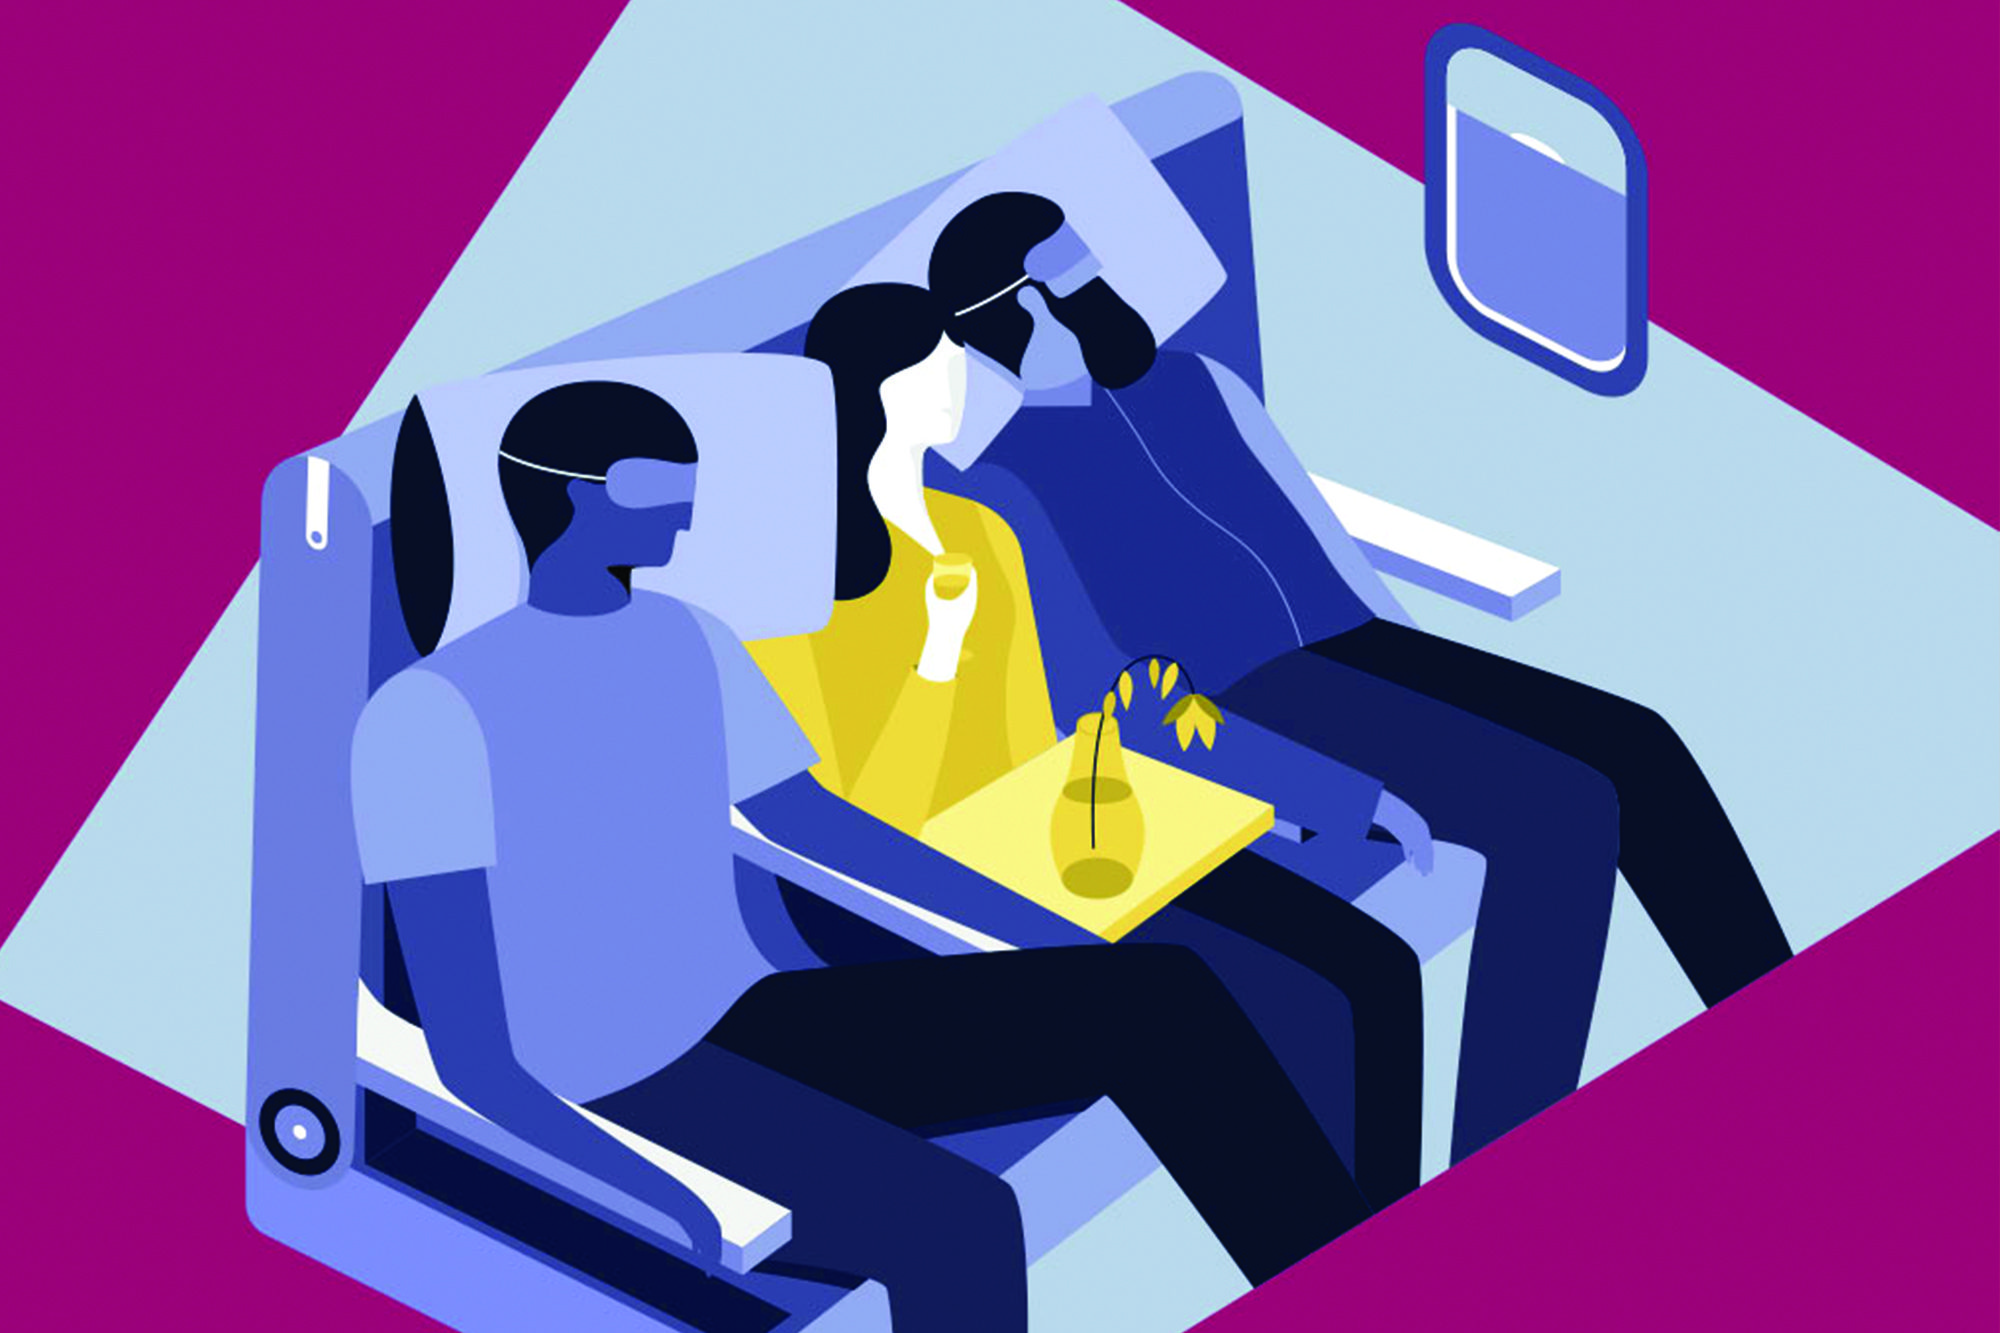 Premium economy is a phrase fit for our sliced-and-diced times where companies are increasingly looking for new ways to sell us average products at luxury prices. 